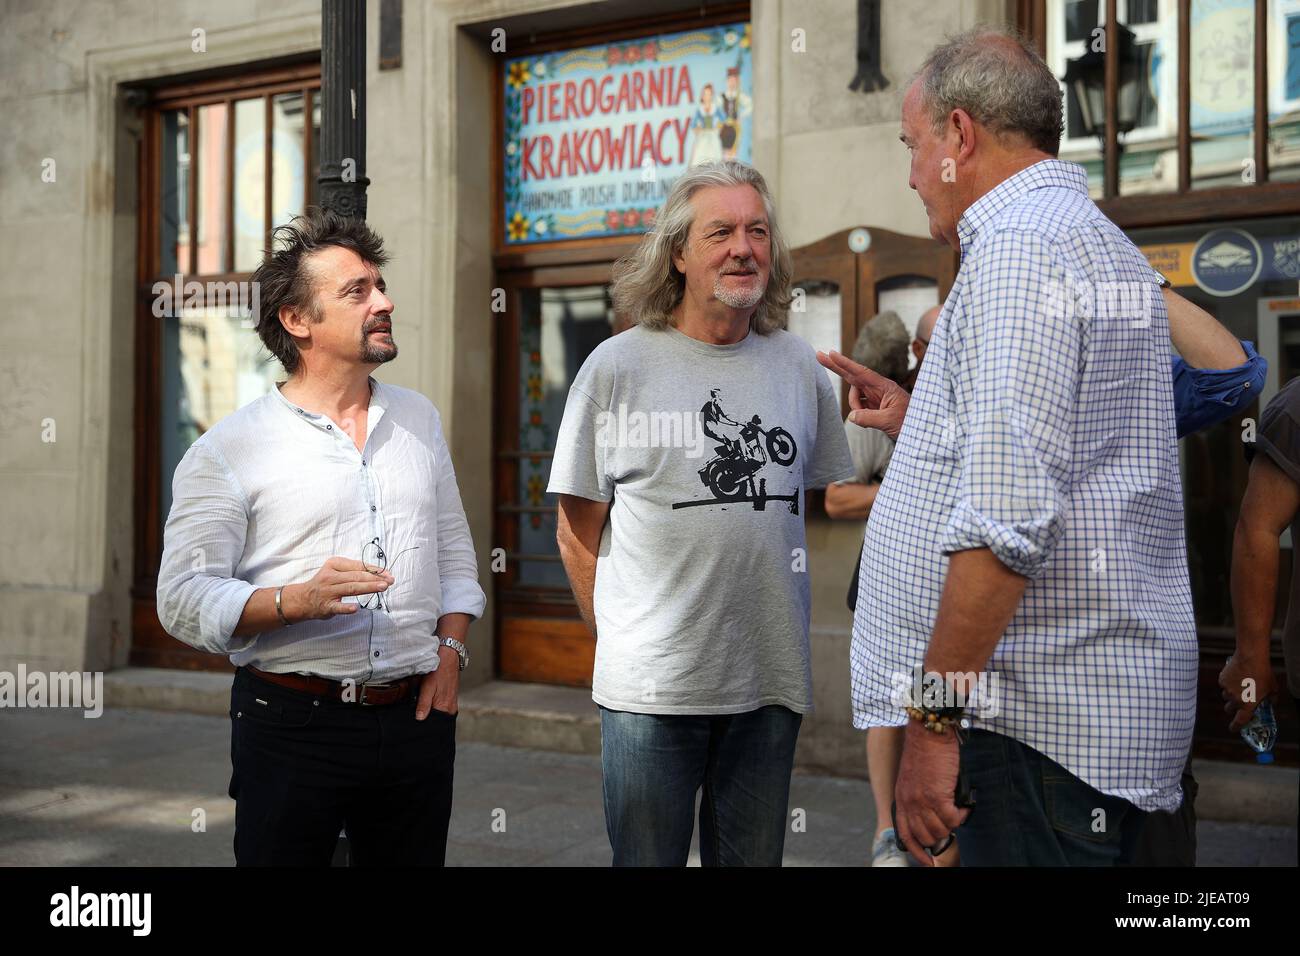 Krakow, Poland. 24th June, 2022. The Grand Tour stars, Jeremy Clarkson,  Richard Hammond and James May, visit Cracow, Poland, while on tour filming  the show. The Grand Tour is a British motoring